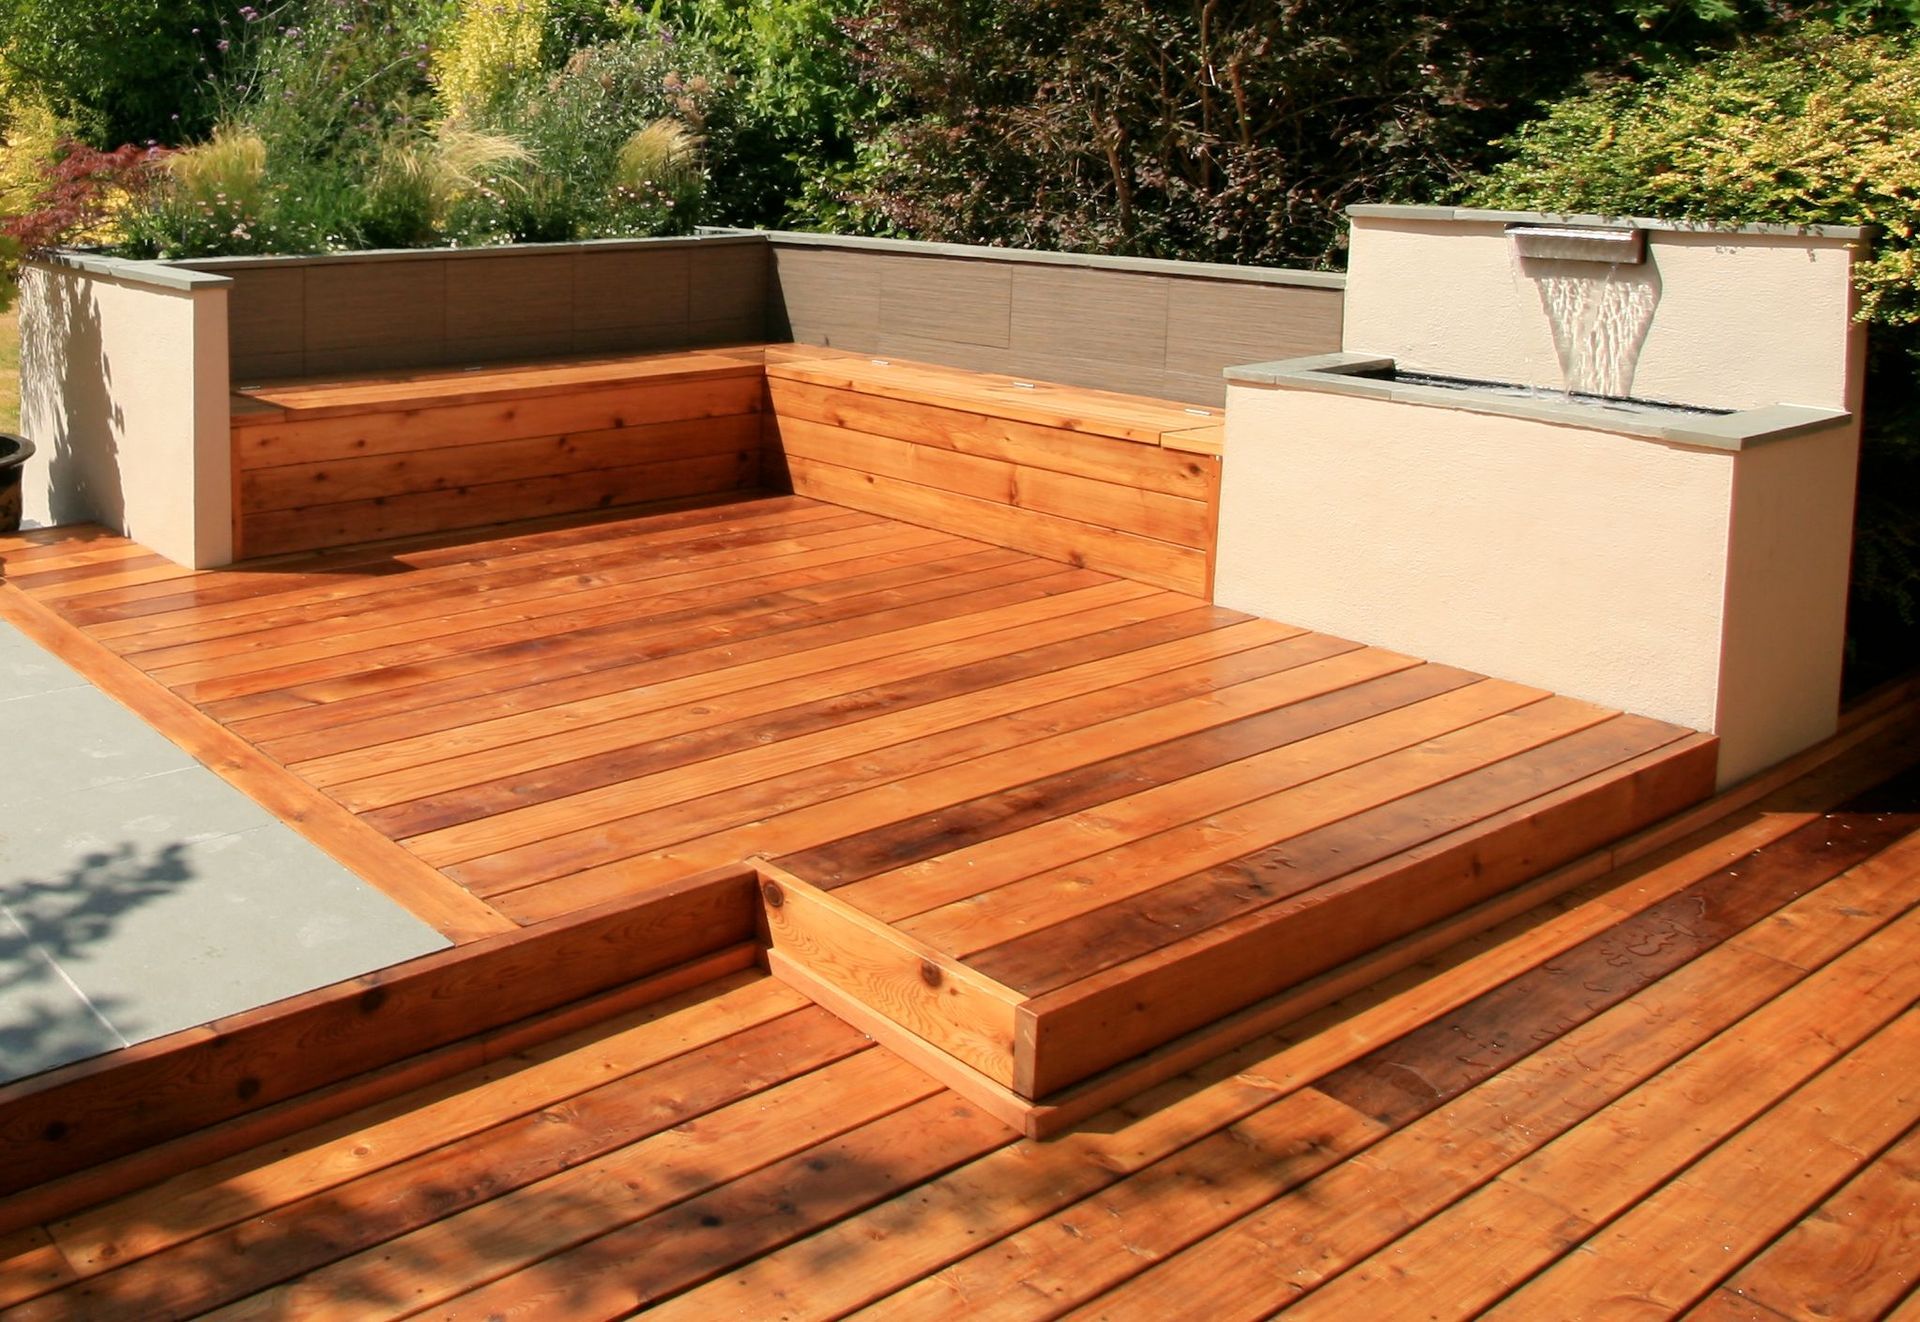 An inviting decking area that is cleaned and restored